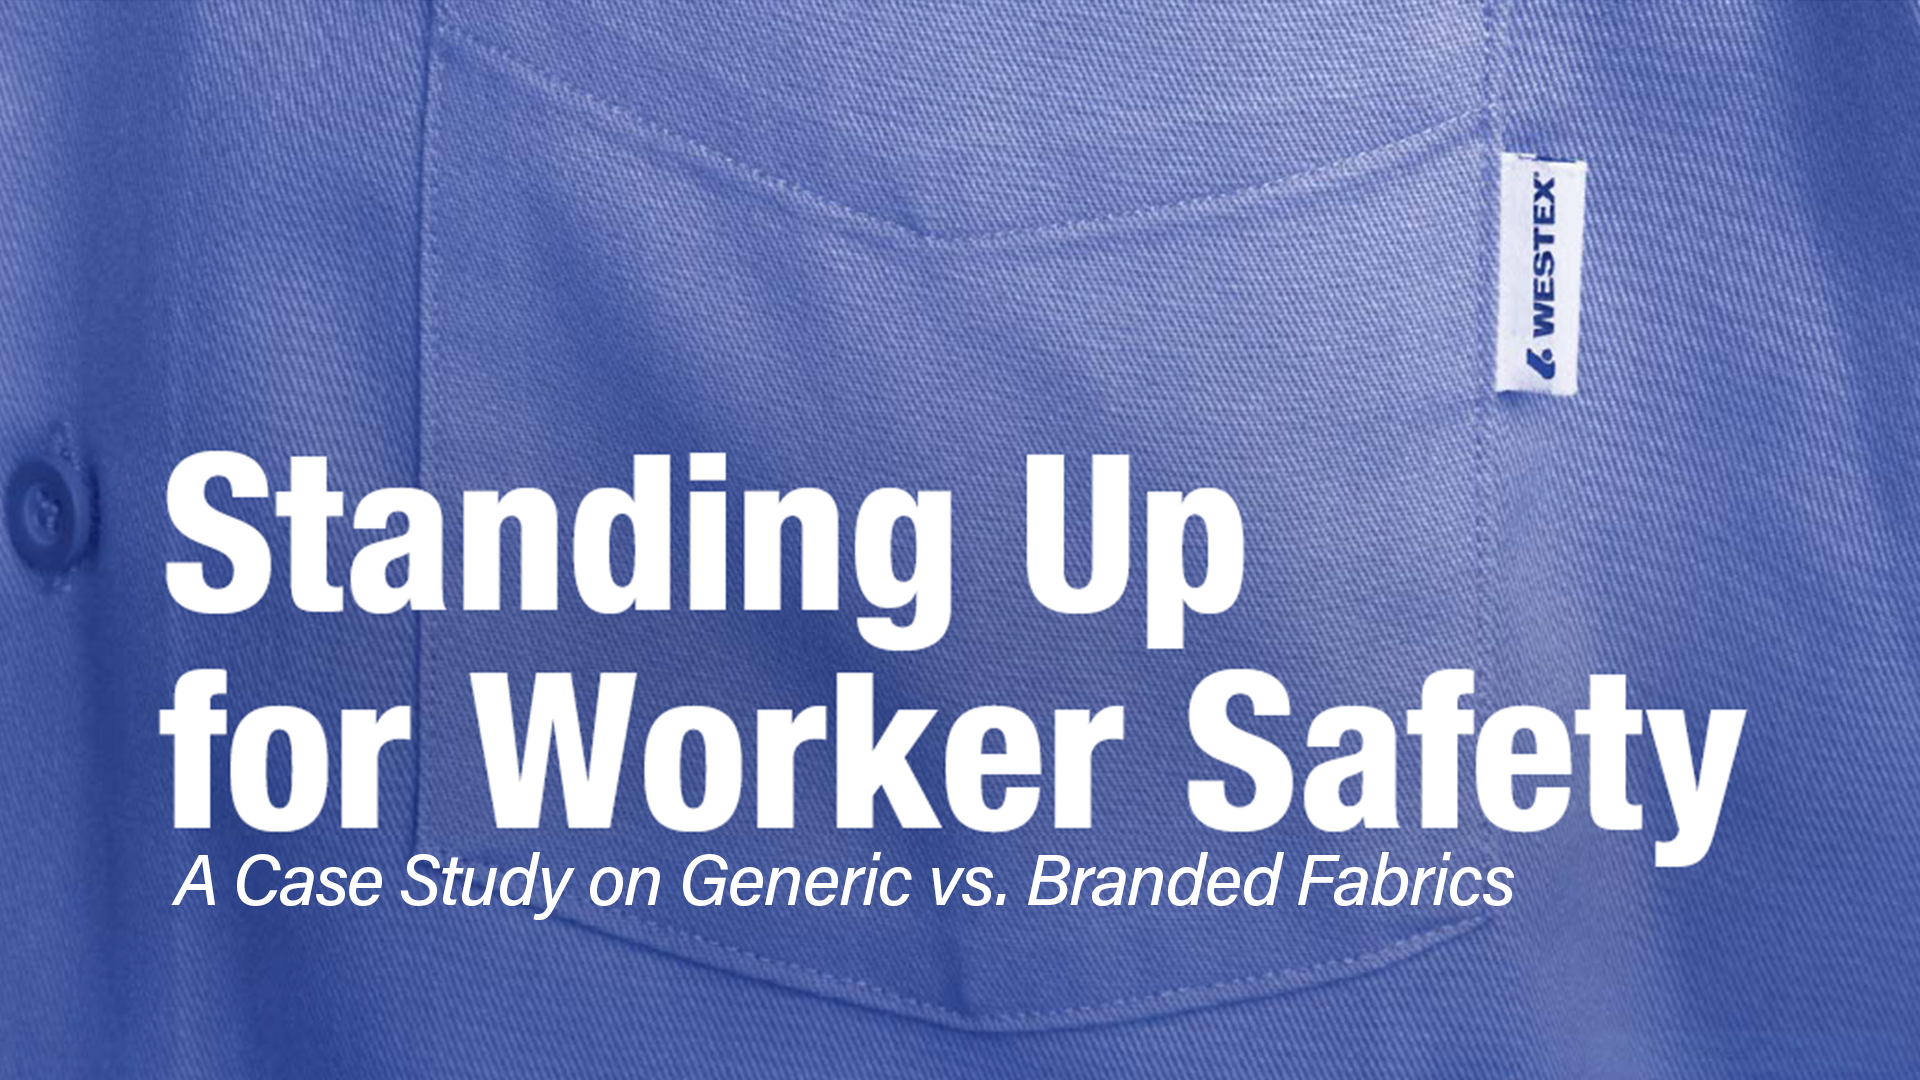 standing up for worker safety: a case study on generic vs. branded fr fabrics